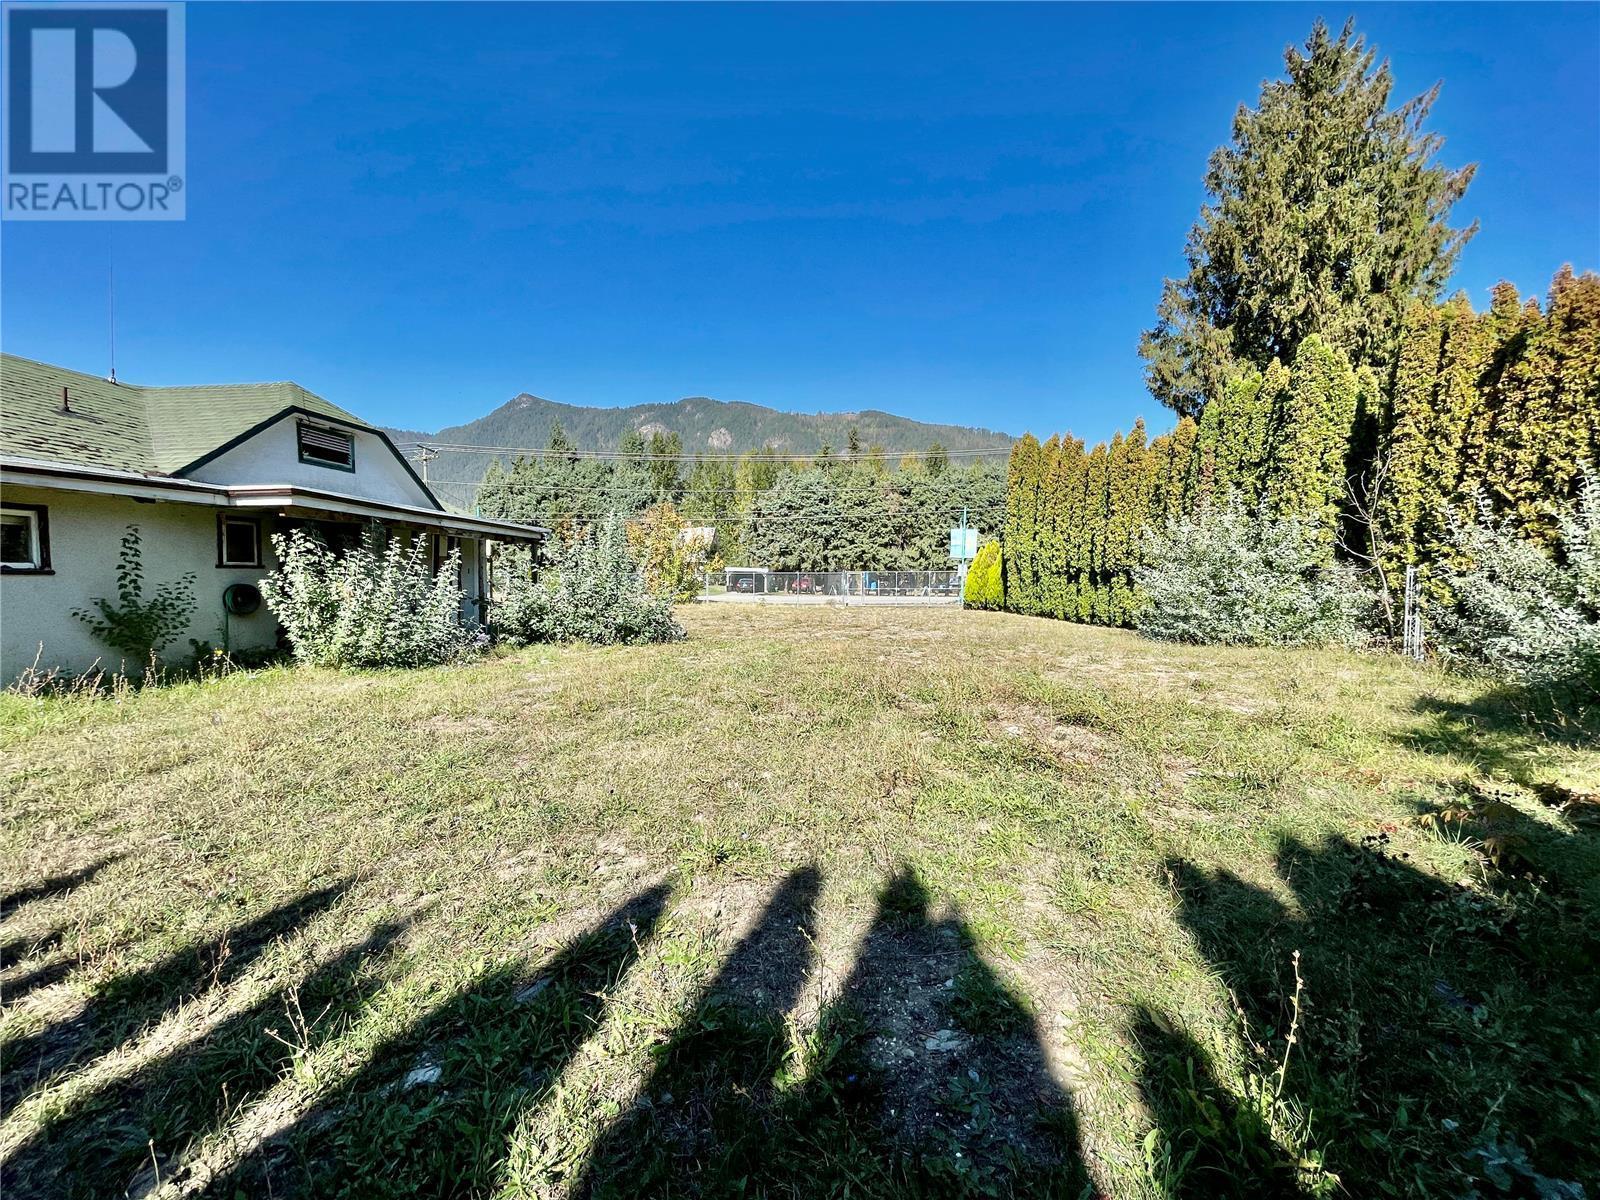  401 Finlayson Street, Sicamous